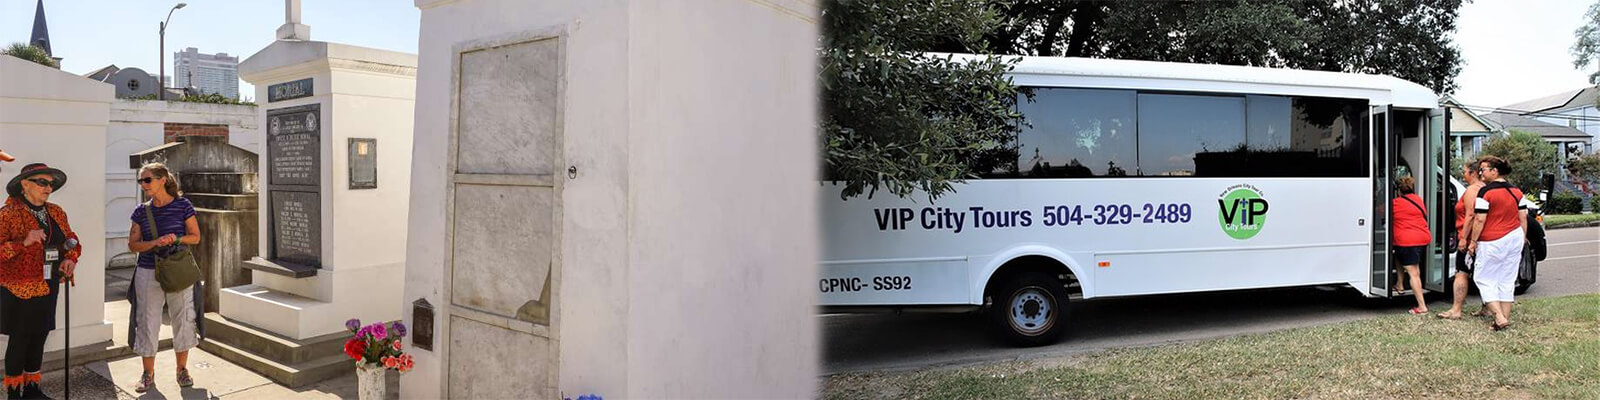 VIP City Tours Coupons